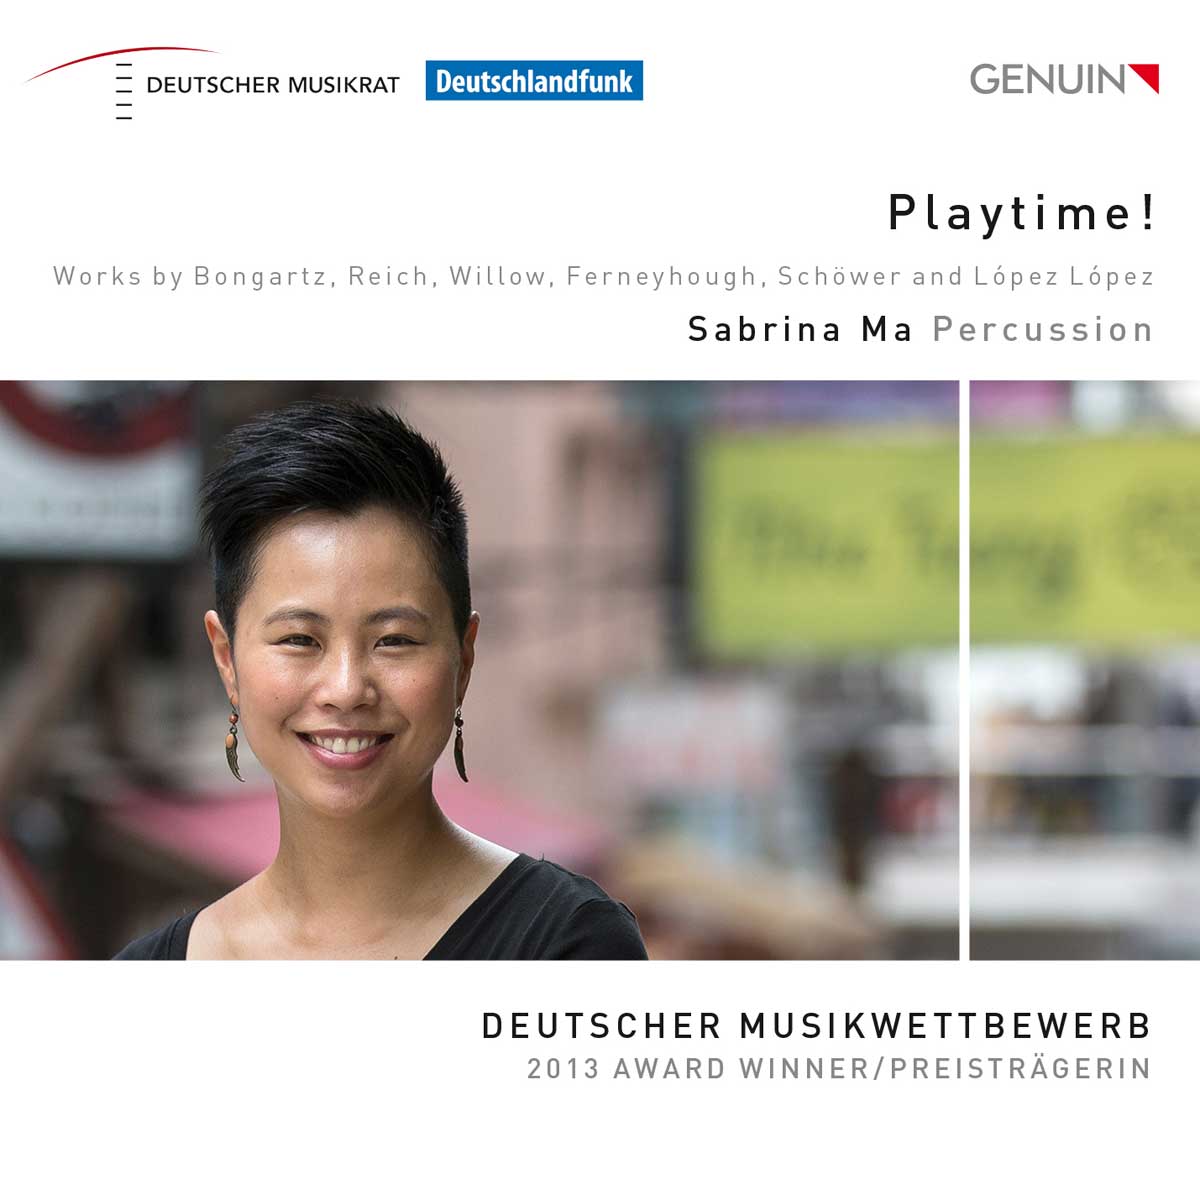 CD album cover 'Playtime!' (GEN 15361) with Sabrina Ma